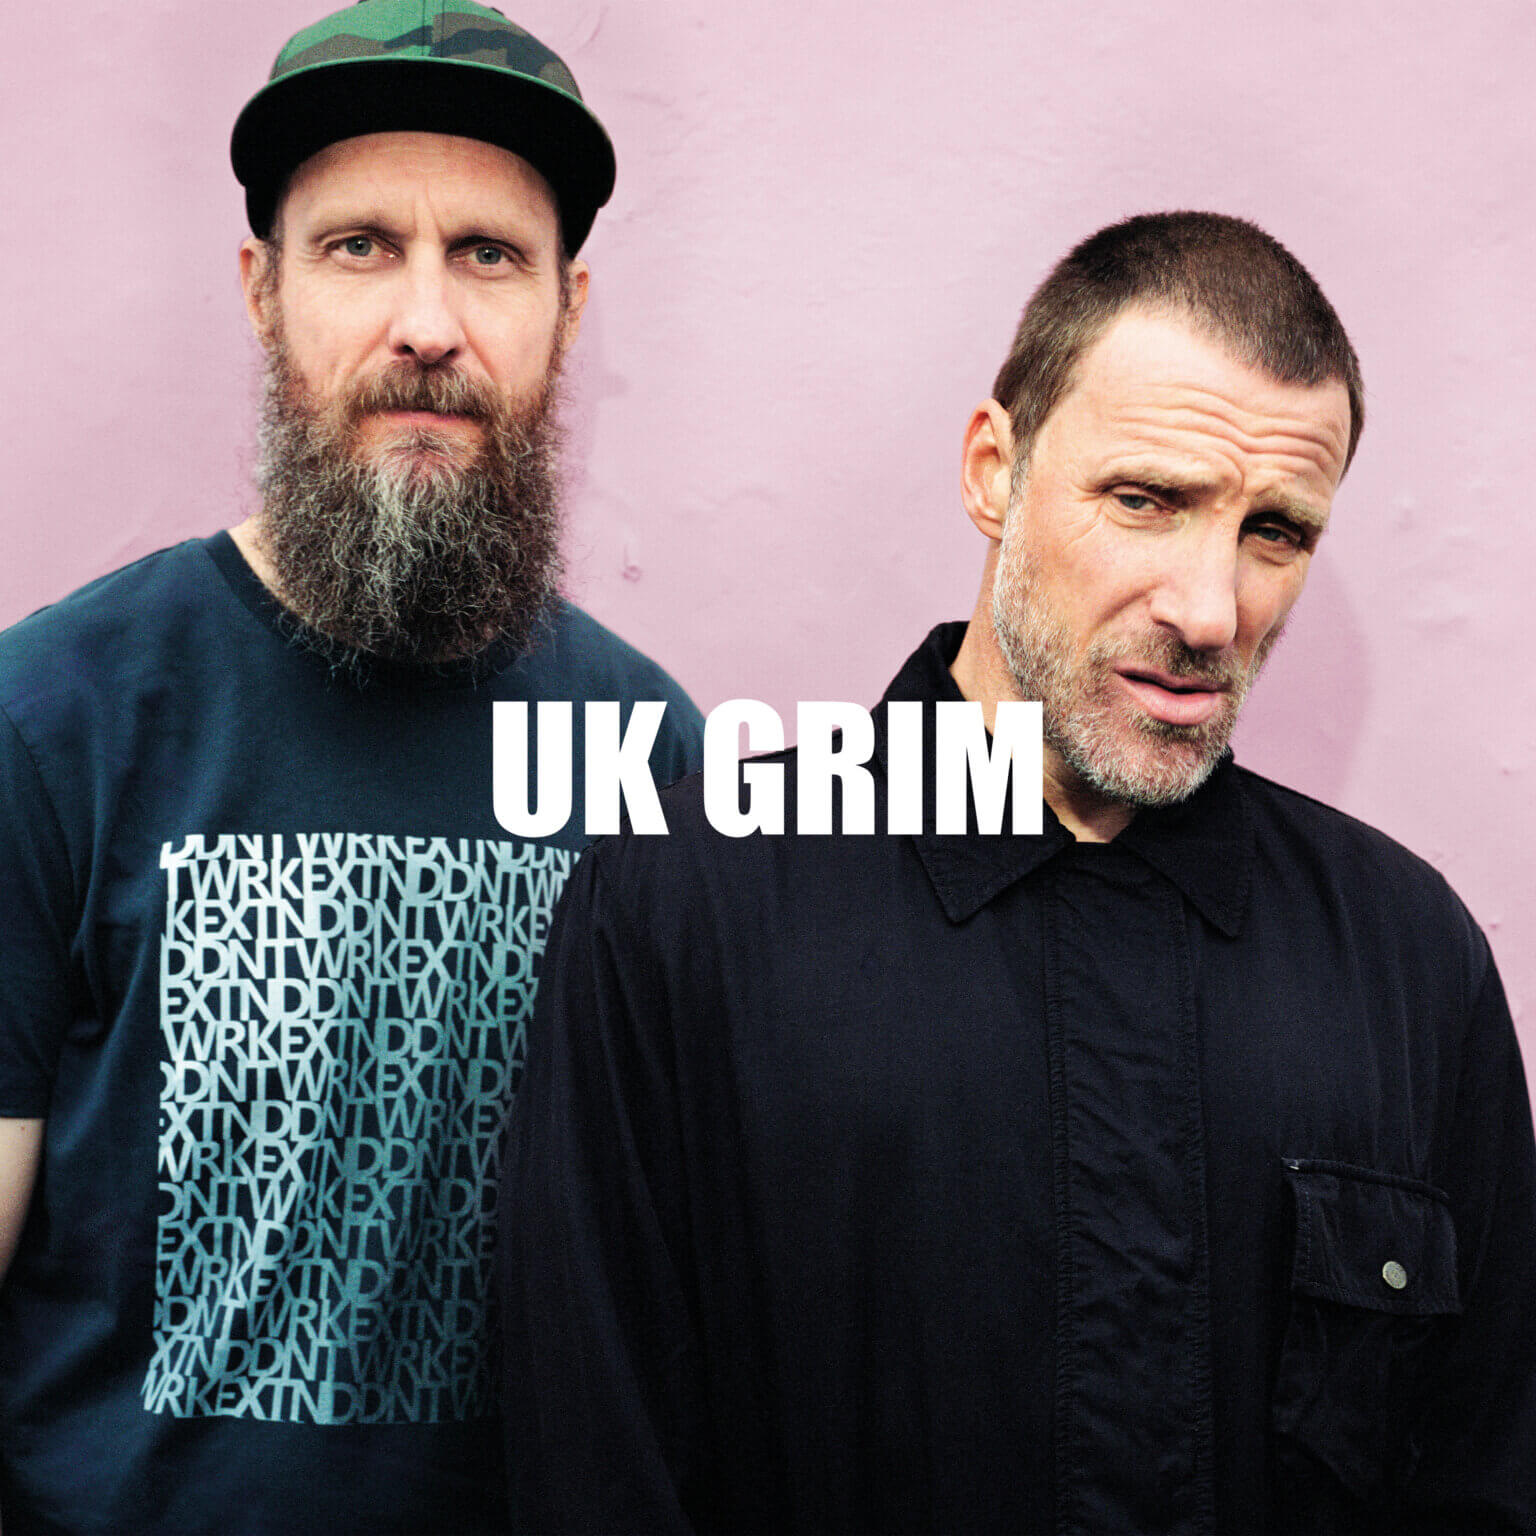 Sleaford Mods have announced their new album 'UK Grim' will drop on March 20, 2023 via Rough Trade records and streaming services